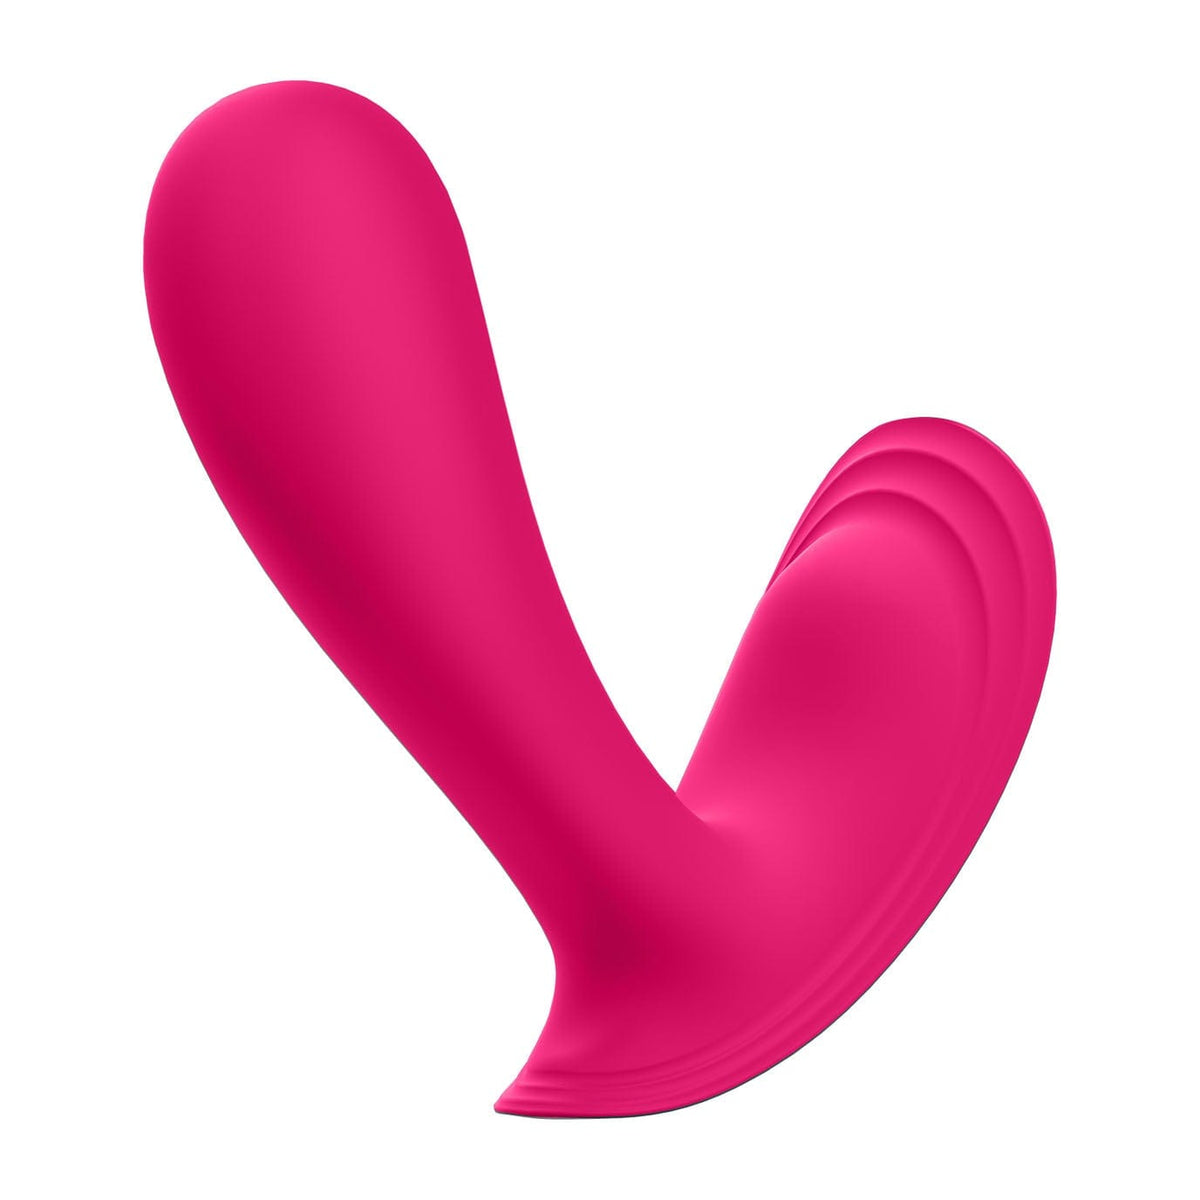 Satisfyer - Top Secret App-Controlled Wearable G-spot Vibrator (Pink) Panties Massager Remote Control (Vibration) Rechargeable 4061504003382 CherryAffairs